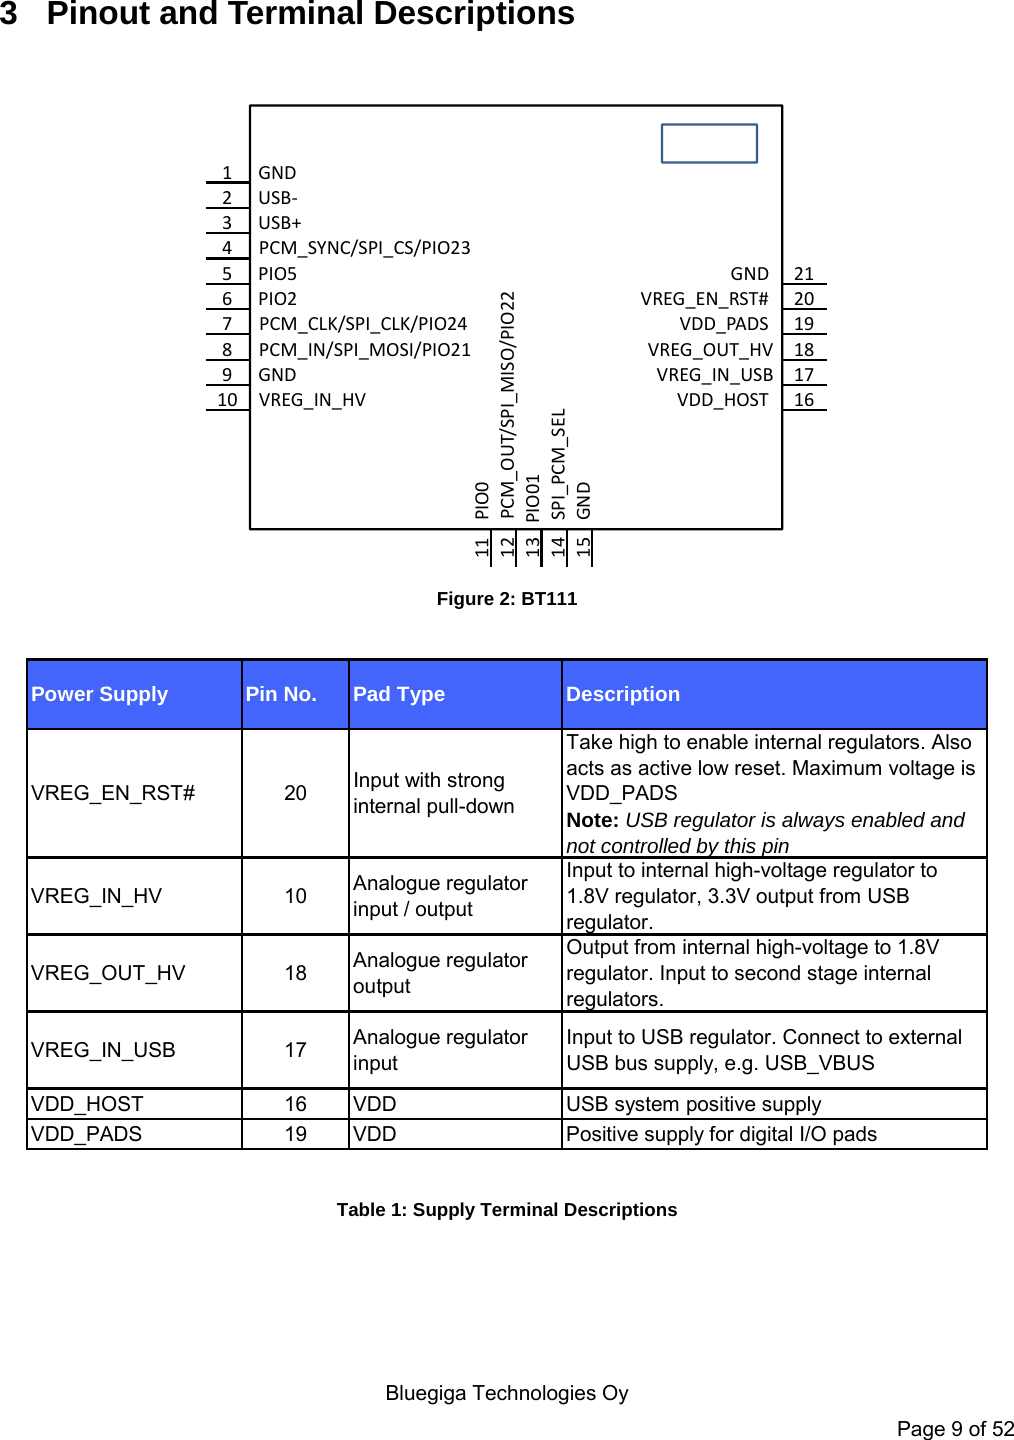    Bluegiga Technologies Oy Page 9 of 52 3  Pinout and Terminal Descriptions  12345678910GND USB-USB+PCM_SYNC/SPI_CS/PIO23PIO5PIO2PCM_CLK/SPI_CLK/PIO24PCM_IN/SPI_MOSI/PIO21GND VREG_IN_HV 1112131415PIO0 PCM_OUT/SPI_MISO/PIO22 PIO01SPI_PCM_SEL GND212019181716VDD_HOST VREG_IN_USBVREG_OUT_HVVDD_PADS VREG_EN_RST# GND  Figure 2: BT111  Power Supply Pin No. Pad Type DescriptionVREG_EN_RST# 20 Input with strong internal pull-downTake high to enable internal regulators. Also acts as active low reset. Maximum voltage is VDD_PADSNote: USB regulator is always enabled and not controlled by this pinVREG_IN_HV 10 Analogue regulator input / outputInput to internal high-voltage regulator to 1.8V regulator, 3.3V output from USB regulator.VREG_OUT_HV 18 Analogue regulator outputOutput from internal high-voltage to 1.8V regulator. Input to second stage internal regulators.VREG_IN_USB 17 Analogue regulator inputInput to USB regulator. Connect to external USB bus supply, e.g. USB_VBUSVDD_HOST 16 VDD USB system positive supplyVDD_PADS 19 VDD Positive supply for digital I/O pads  Table 1: Supply Terminal Descriptions 